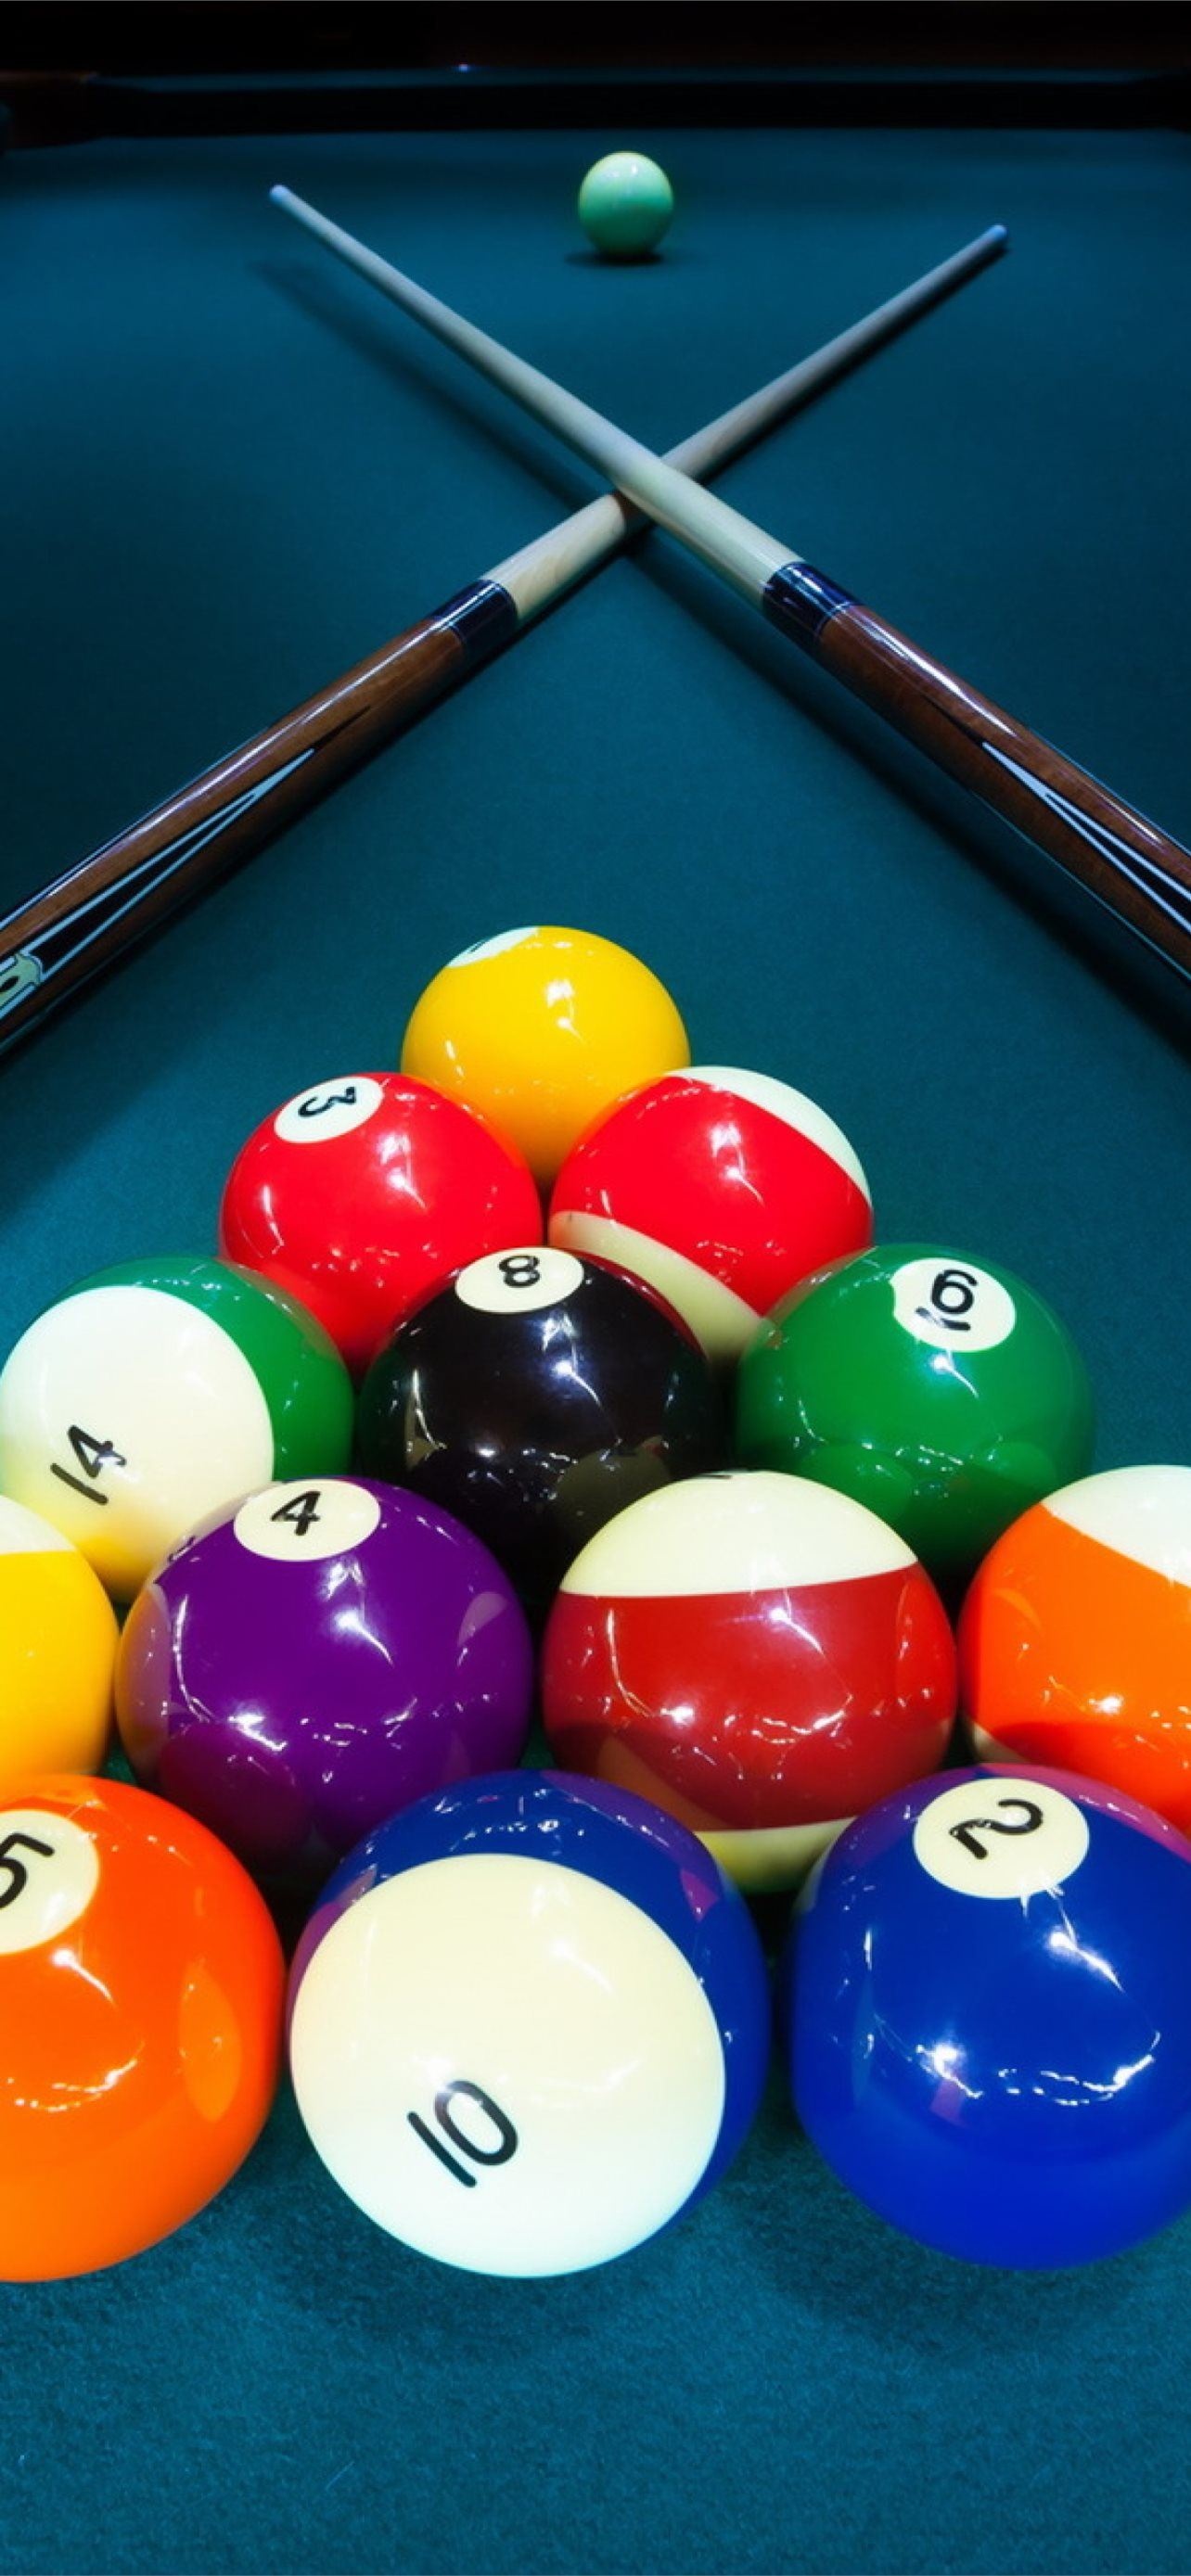 Pool (Cue Sports): Two cue sticks, object balls and the main white cue ball - equipment for the eight-ball. 1290x2780 HD Background.